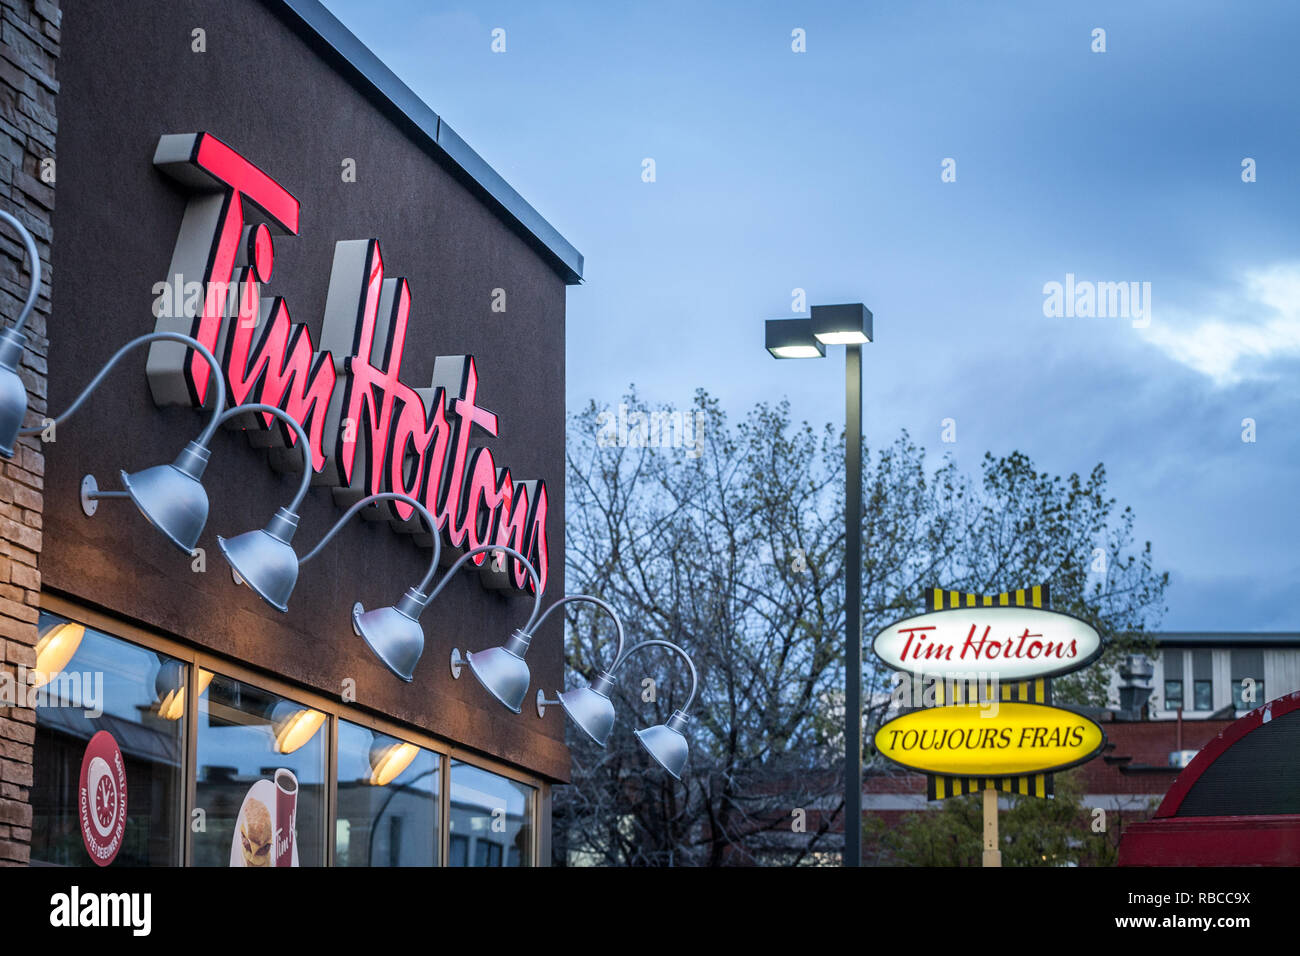 MONTREAL, CANADA - NOVEMBER 6, 2018: Tim Hortons logo in front of one of their restaurants in Quebec with their slogan in French in the background. Ti Stock Photo